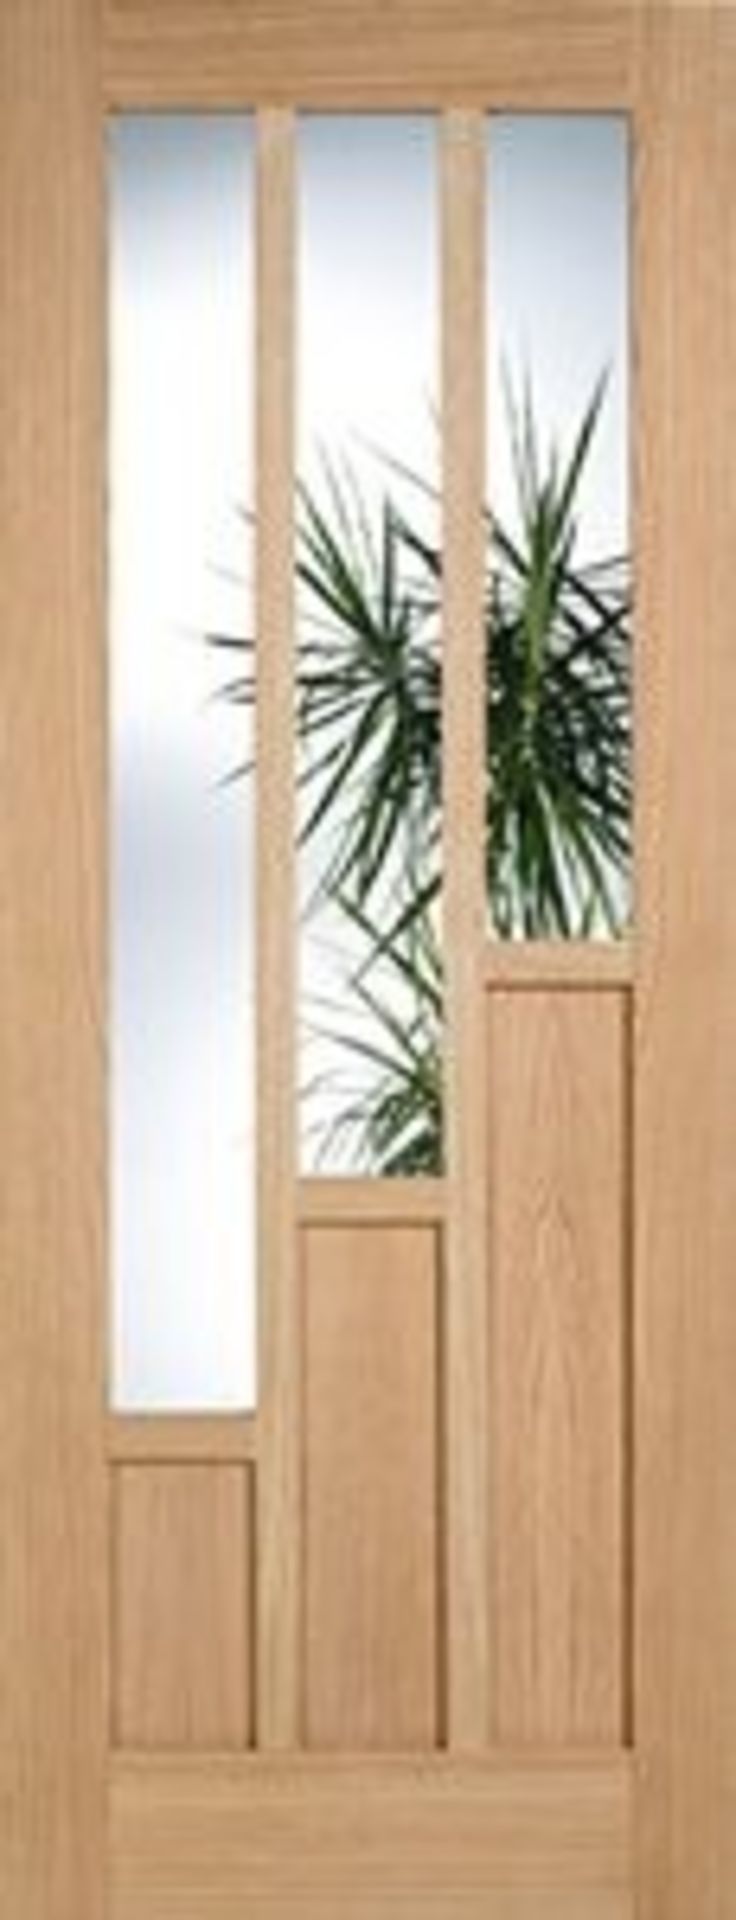 1 GRADE A BOXED COVENTRY DOOR, CLEAR GLASS IN OAK, 600CM X 198CM X 40MM THICK / RRP £295.00 (VIEWING